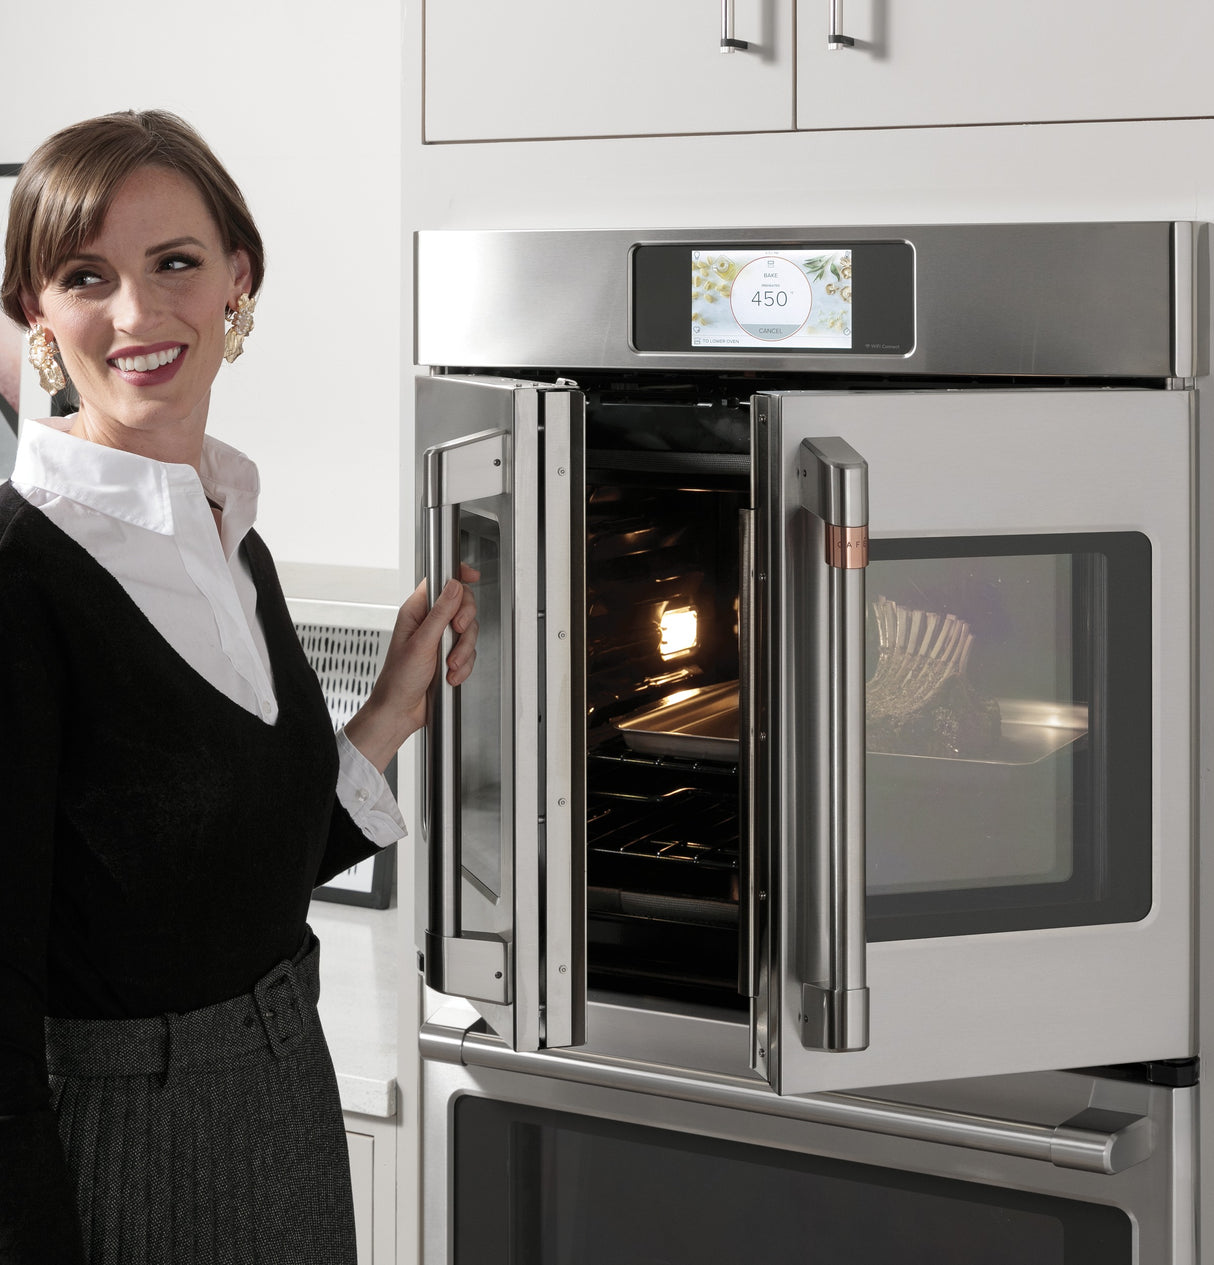 Caf(eback)(TM) Professional Series 30" Smart Built-In Convection French-Door Double Wall Oven - (CTD90FP4NW2)